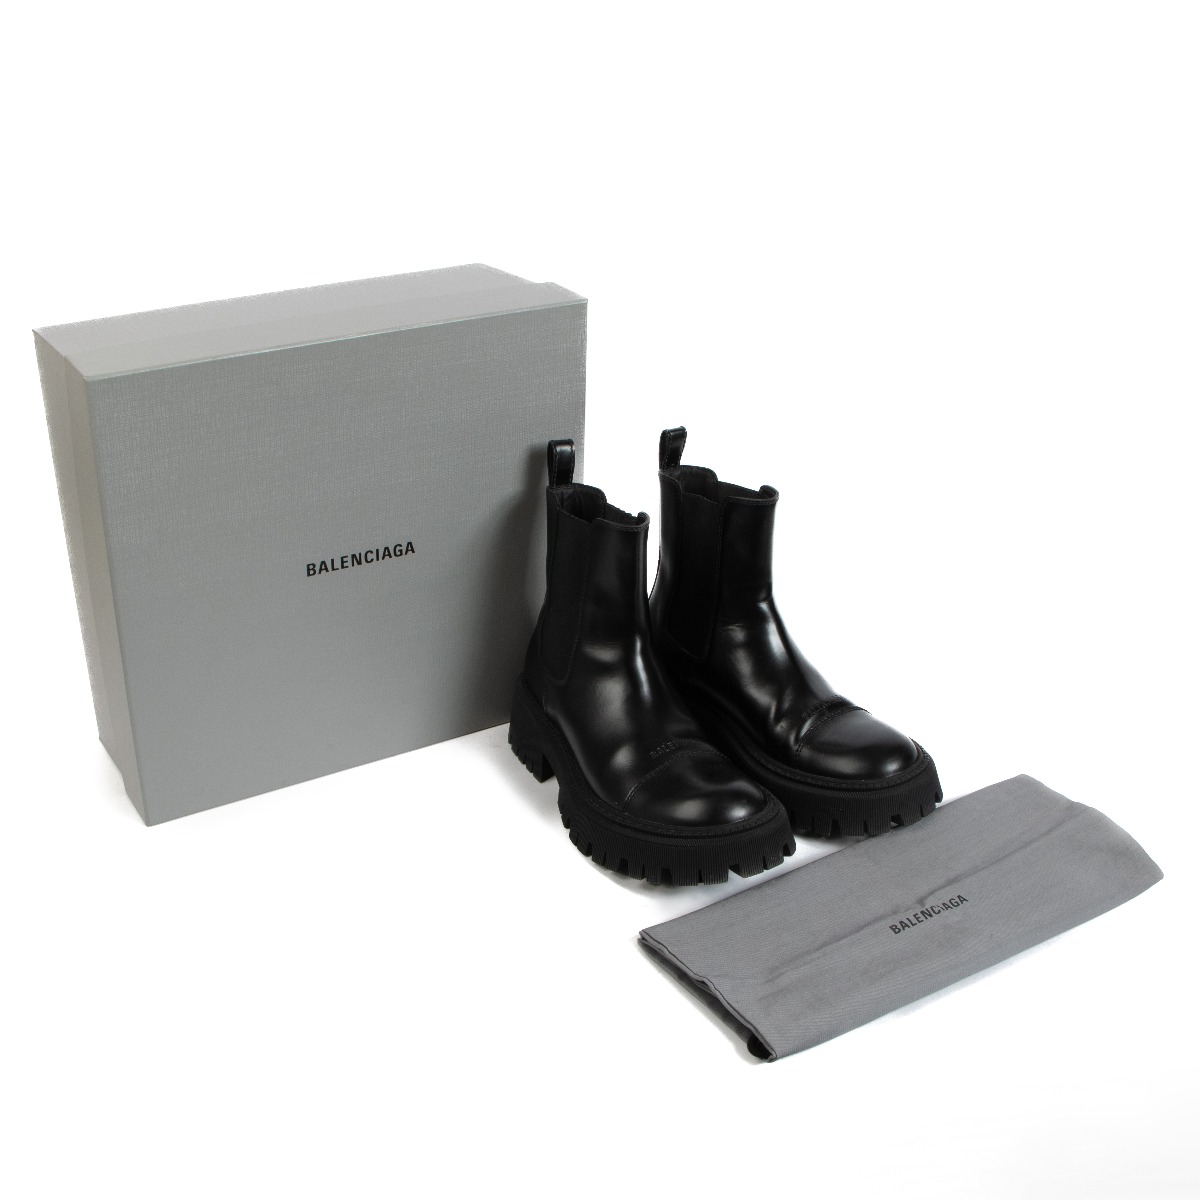 Balenciaga Women Black Ankle Boots Leather Strappy Low Block Heel Booties  EUR 39  eBay